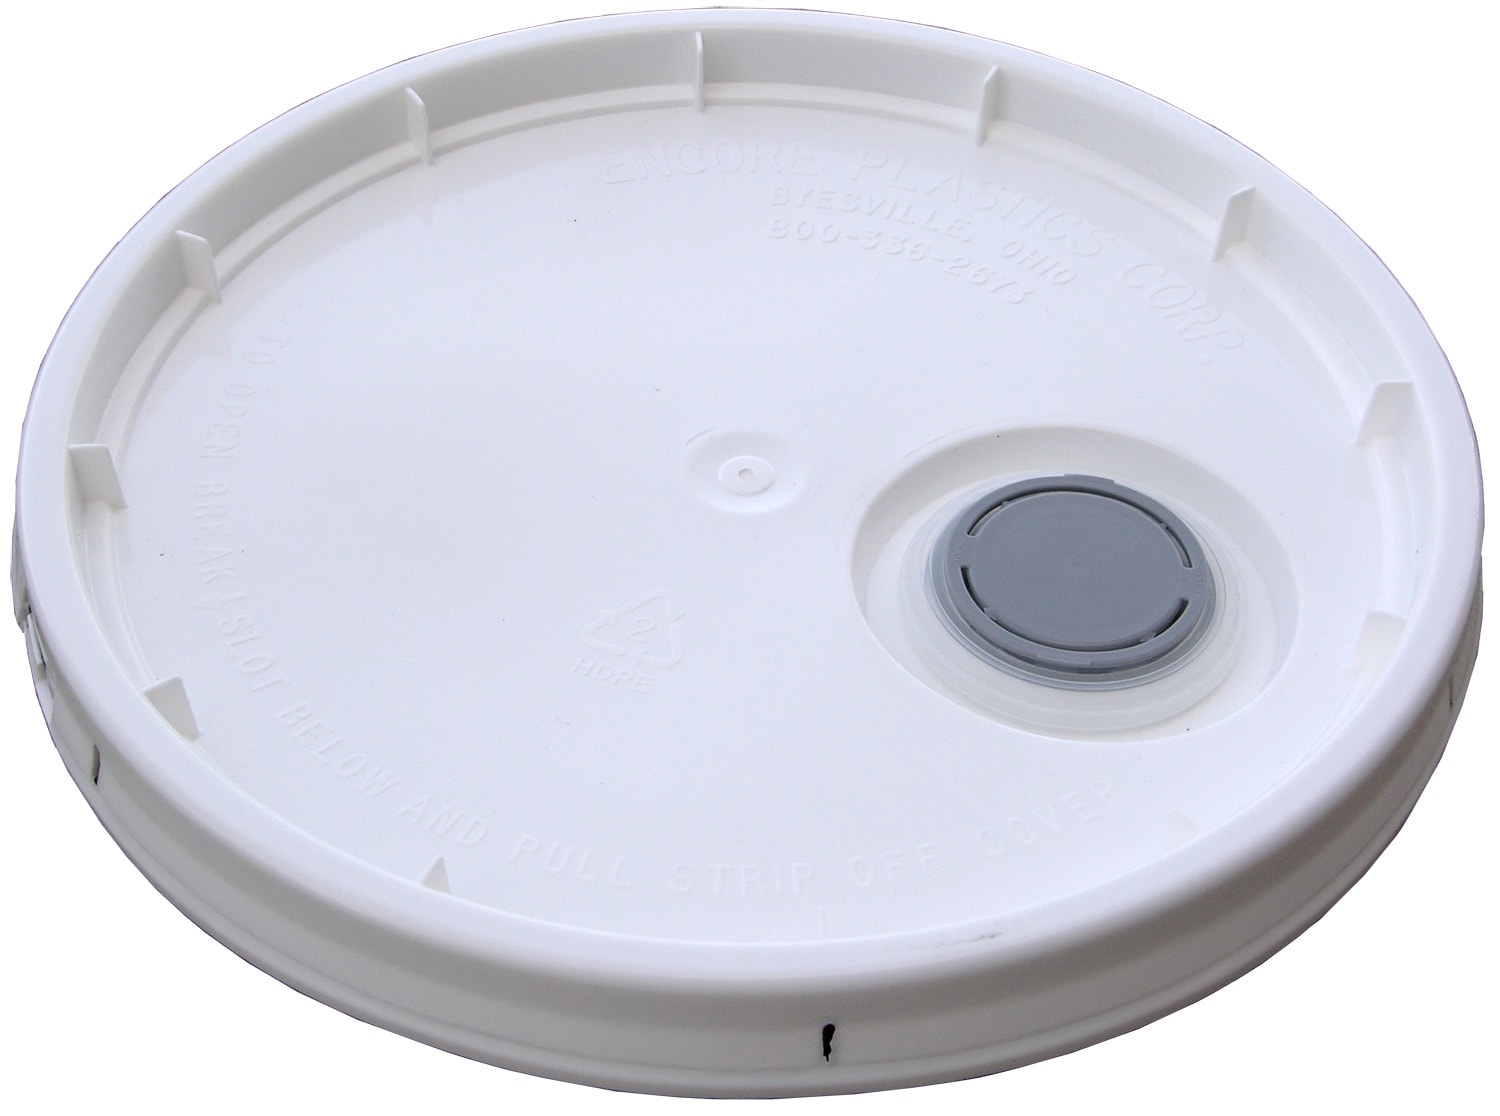 Lid for 5 Gallon Bucket, Price 8118